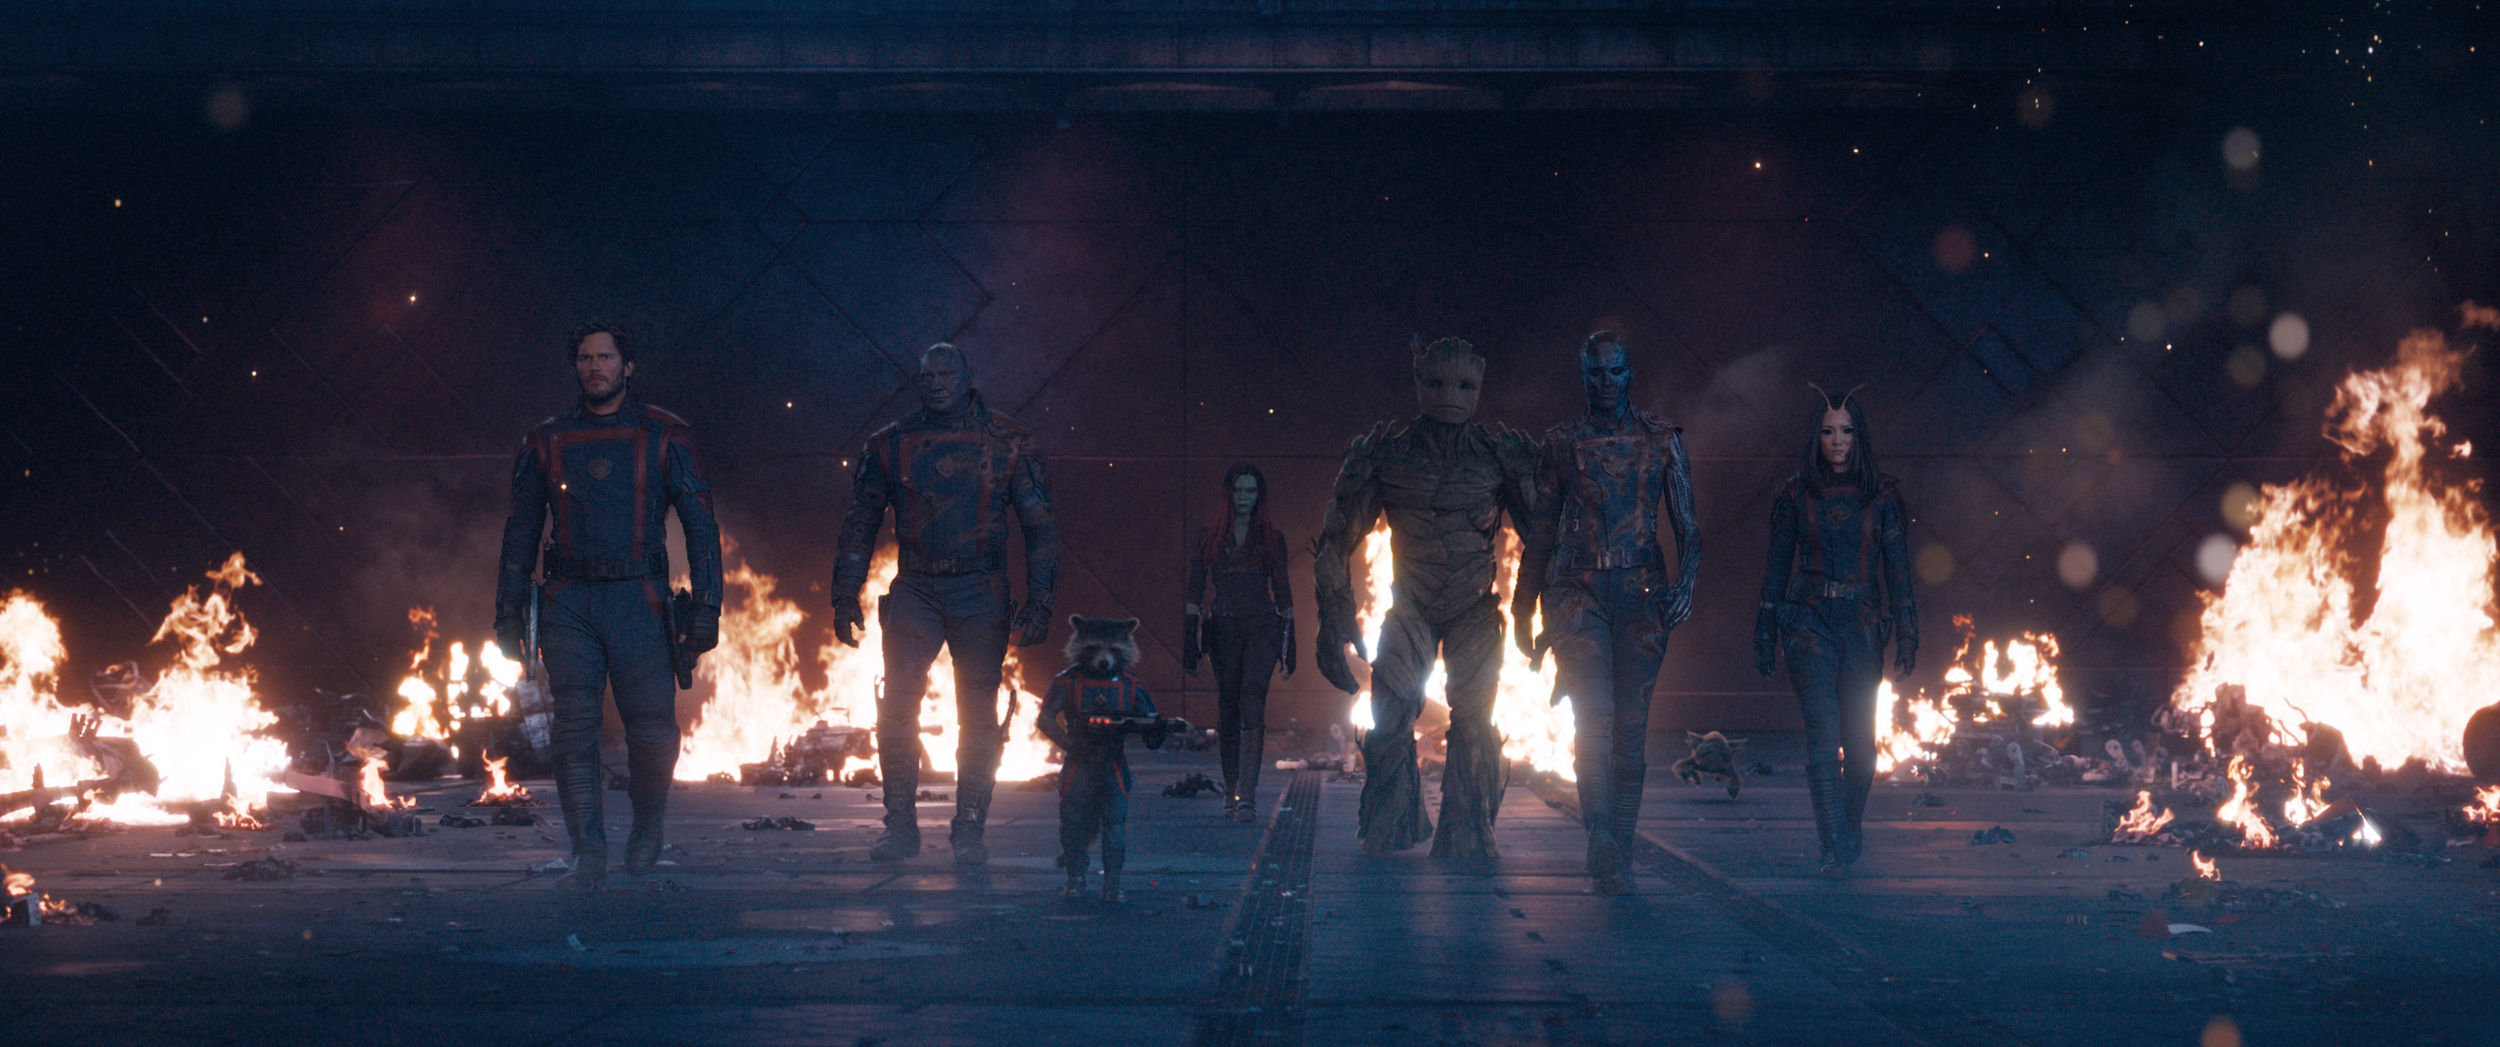 <p>Perhaps people were just excited to see the Guardians of the Galaxy back. The third film in the trilogy made roughly $340 million domestically and just over $808 million worldwide. Perhaps it has a run left somewhere in the world that can boost that a bit, but it’s still a big-time success. It was the fourth-highest-grossing film of 2023. Domestically, it is second as well, though as of this writing, “Spider-Man: Across the Spider-Verse” is hot on its heels, and even “The Little Mermaid” might jump it.</p><p><a href='https://www.msn.com/en-us/community/channel/vid-cj9pqbr0vn9in2b6ddcd8sfgpfq6x6utp44fssrv6mc2gtybw0us'>Follow us on MSN to see more of our exclusive entertainment content.</a></p>